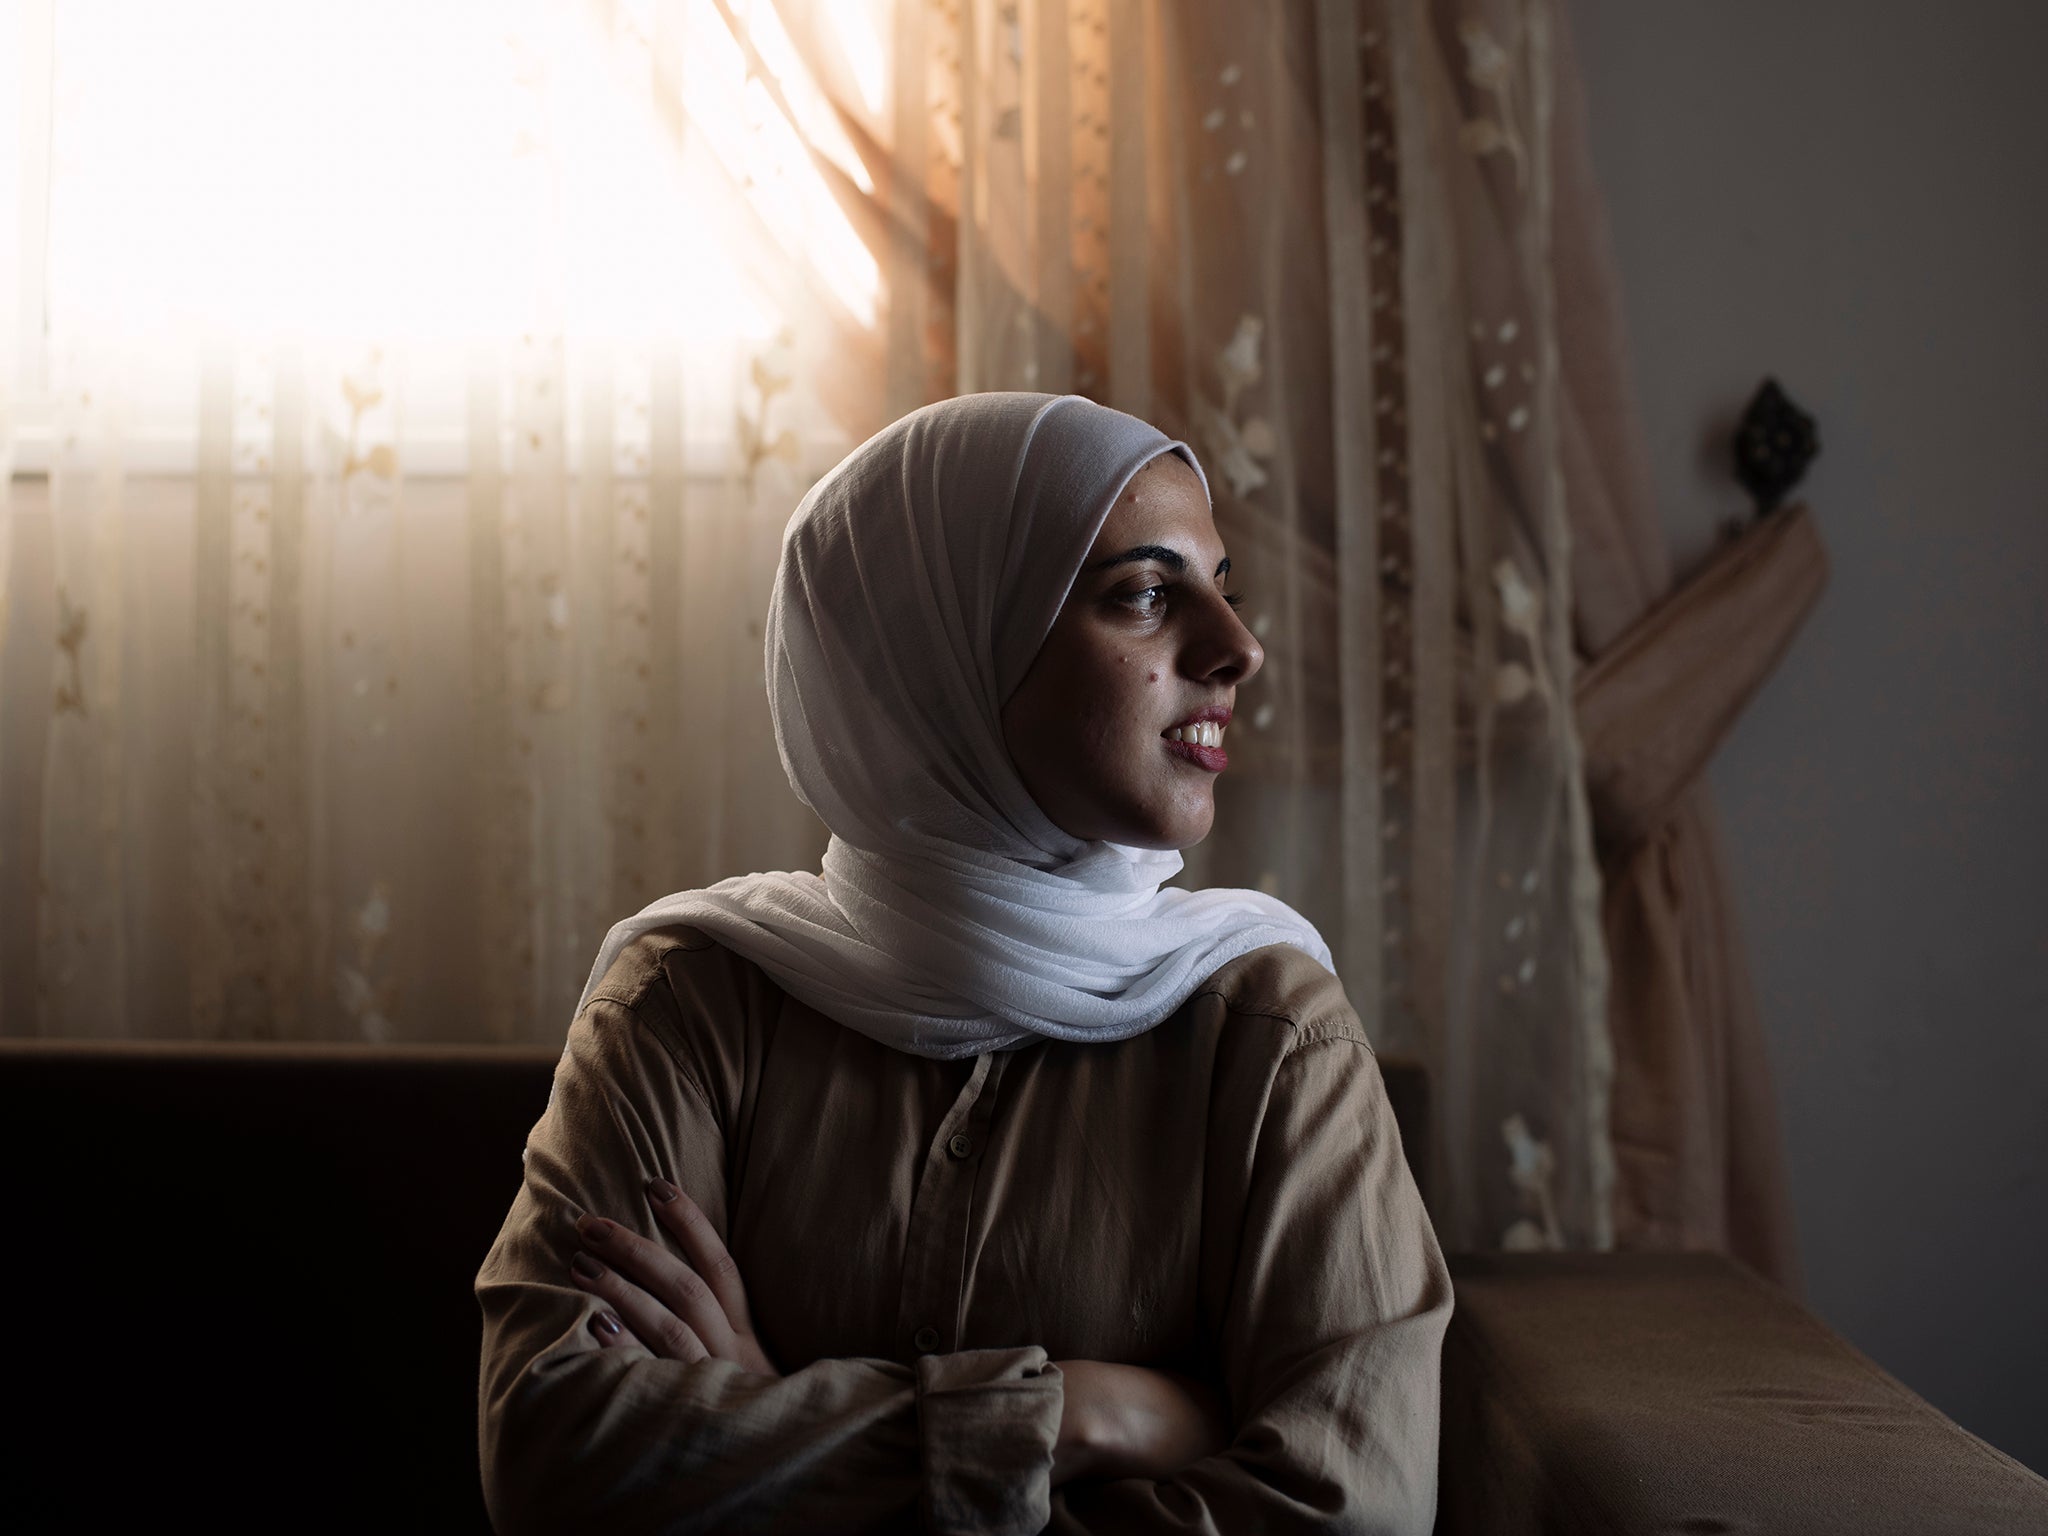 Aya Besaiso, 24, from Gaza City, has been in full time employment as a consultant ever since graduating